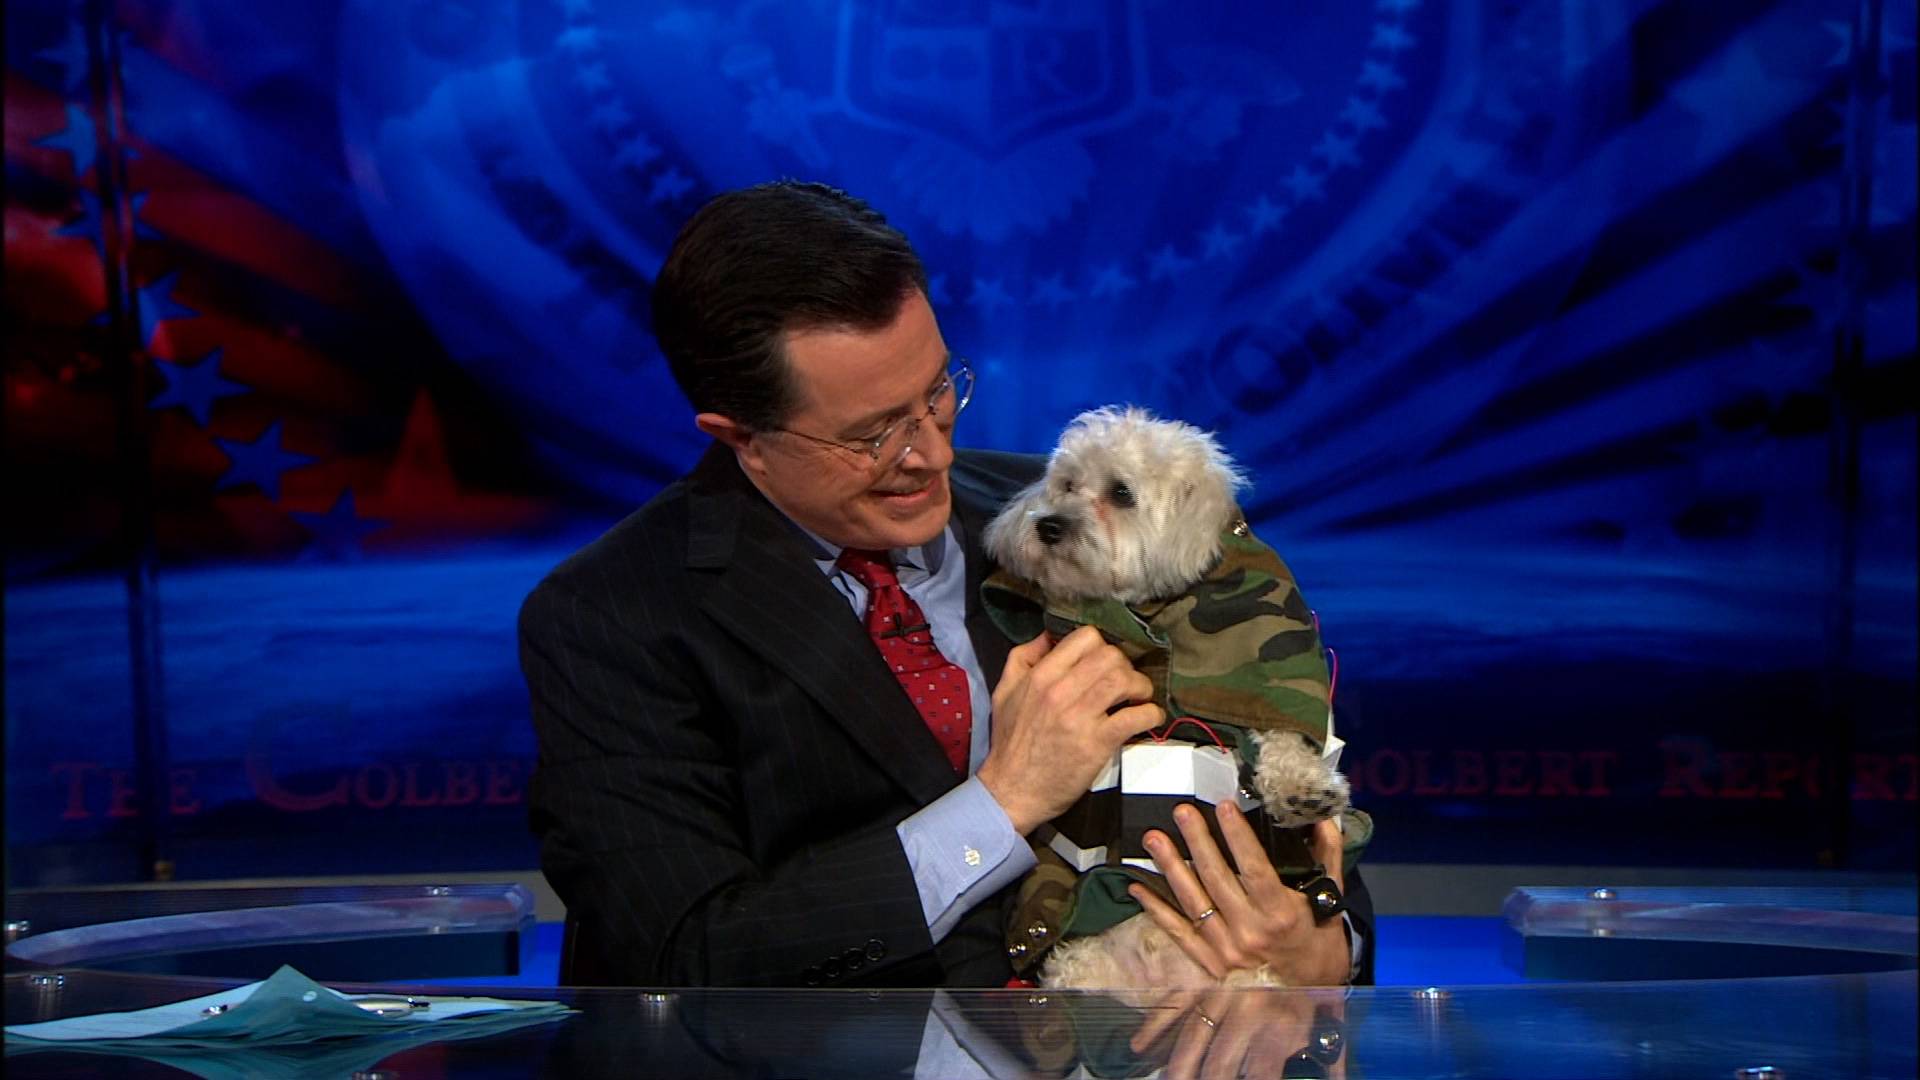 Middle Eastern Dogs - The Colbert Report (Video Clip) | Comedy Central US